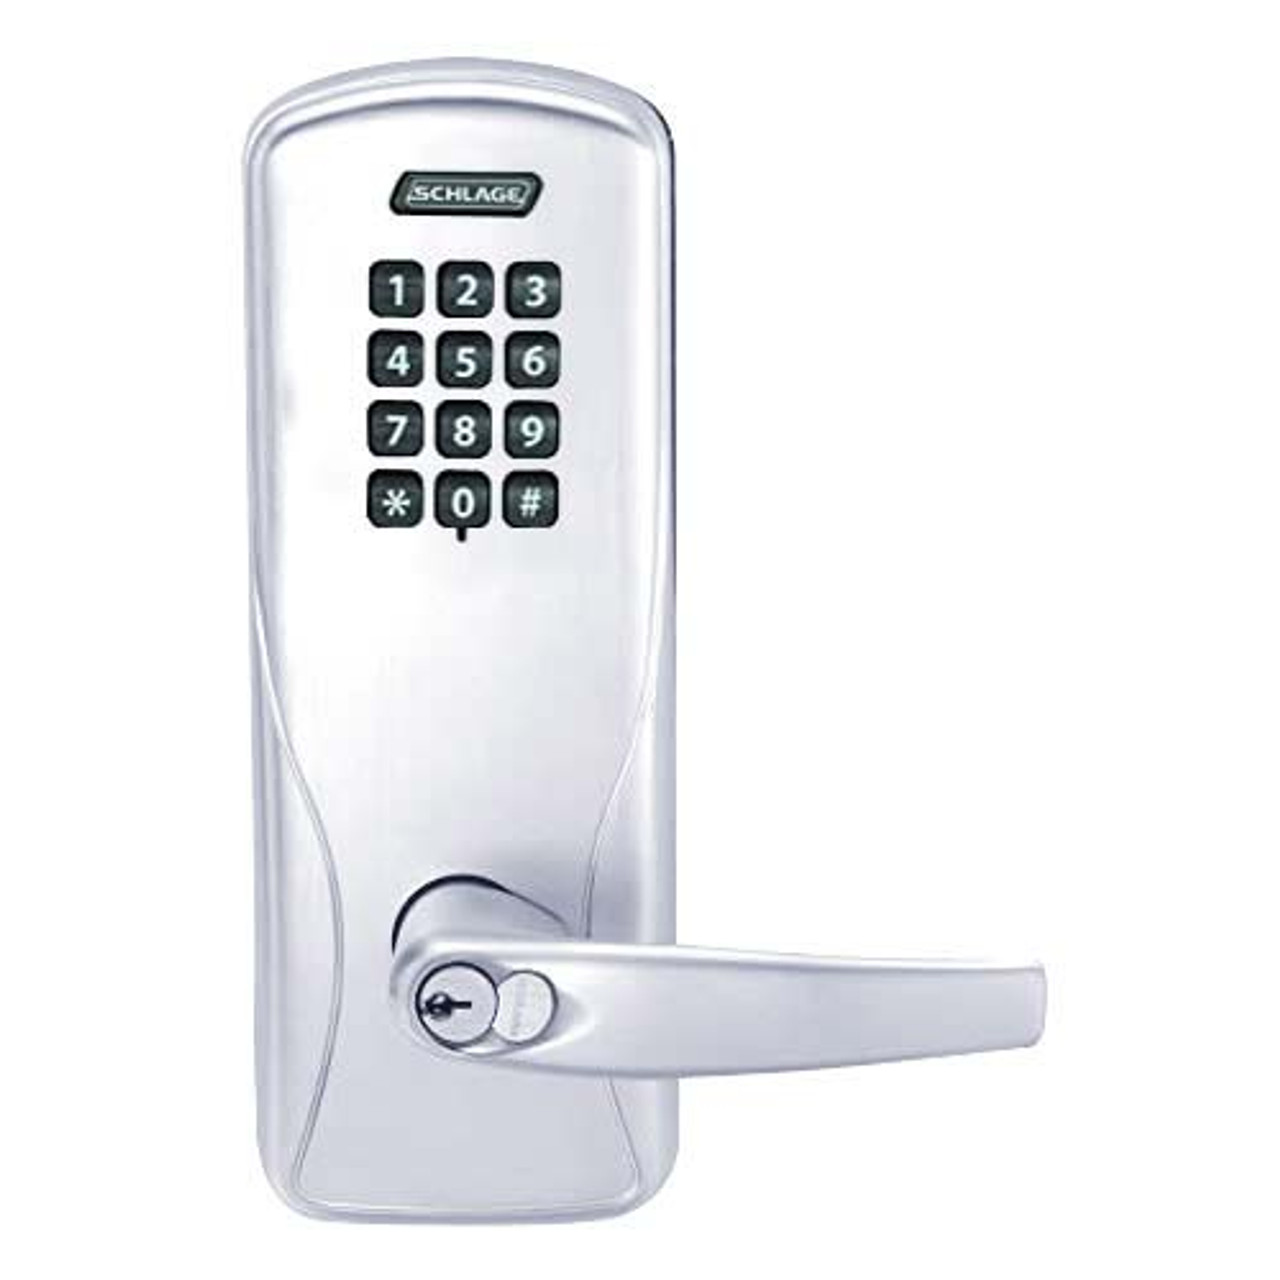 CO100-MS-50-KP-ATH-GD-29R-625 Schlage Standalone Mortise Electronic Keypad locks in Bright Chrome